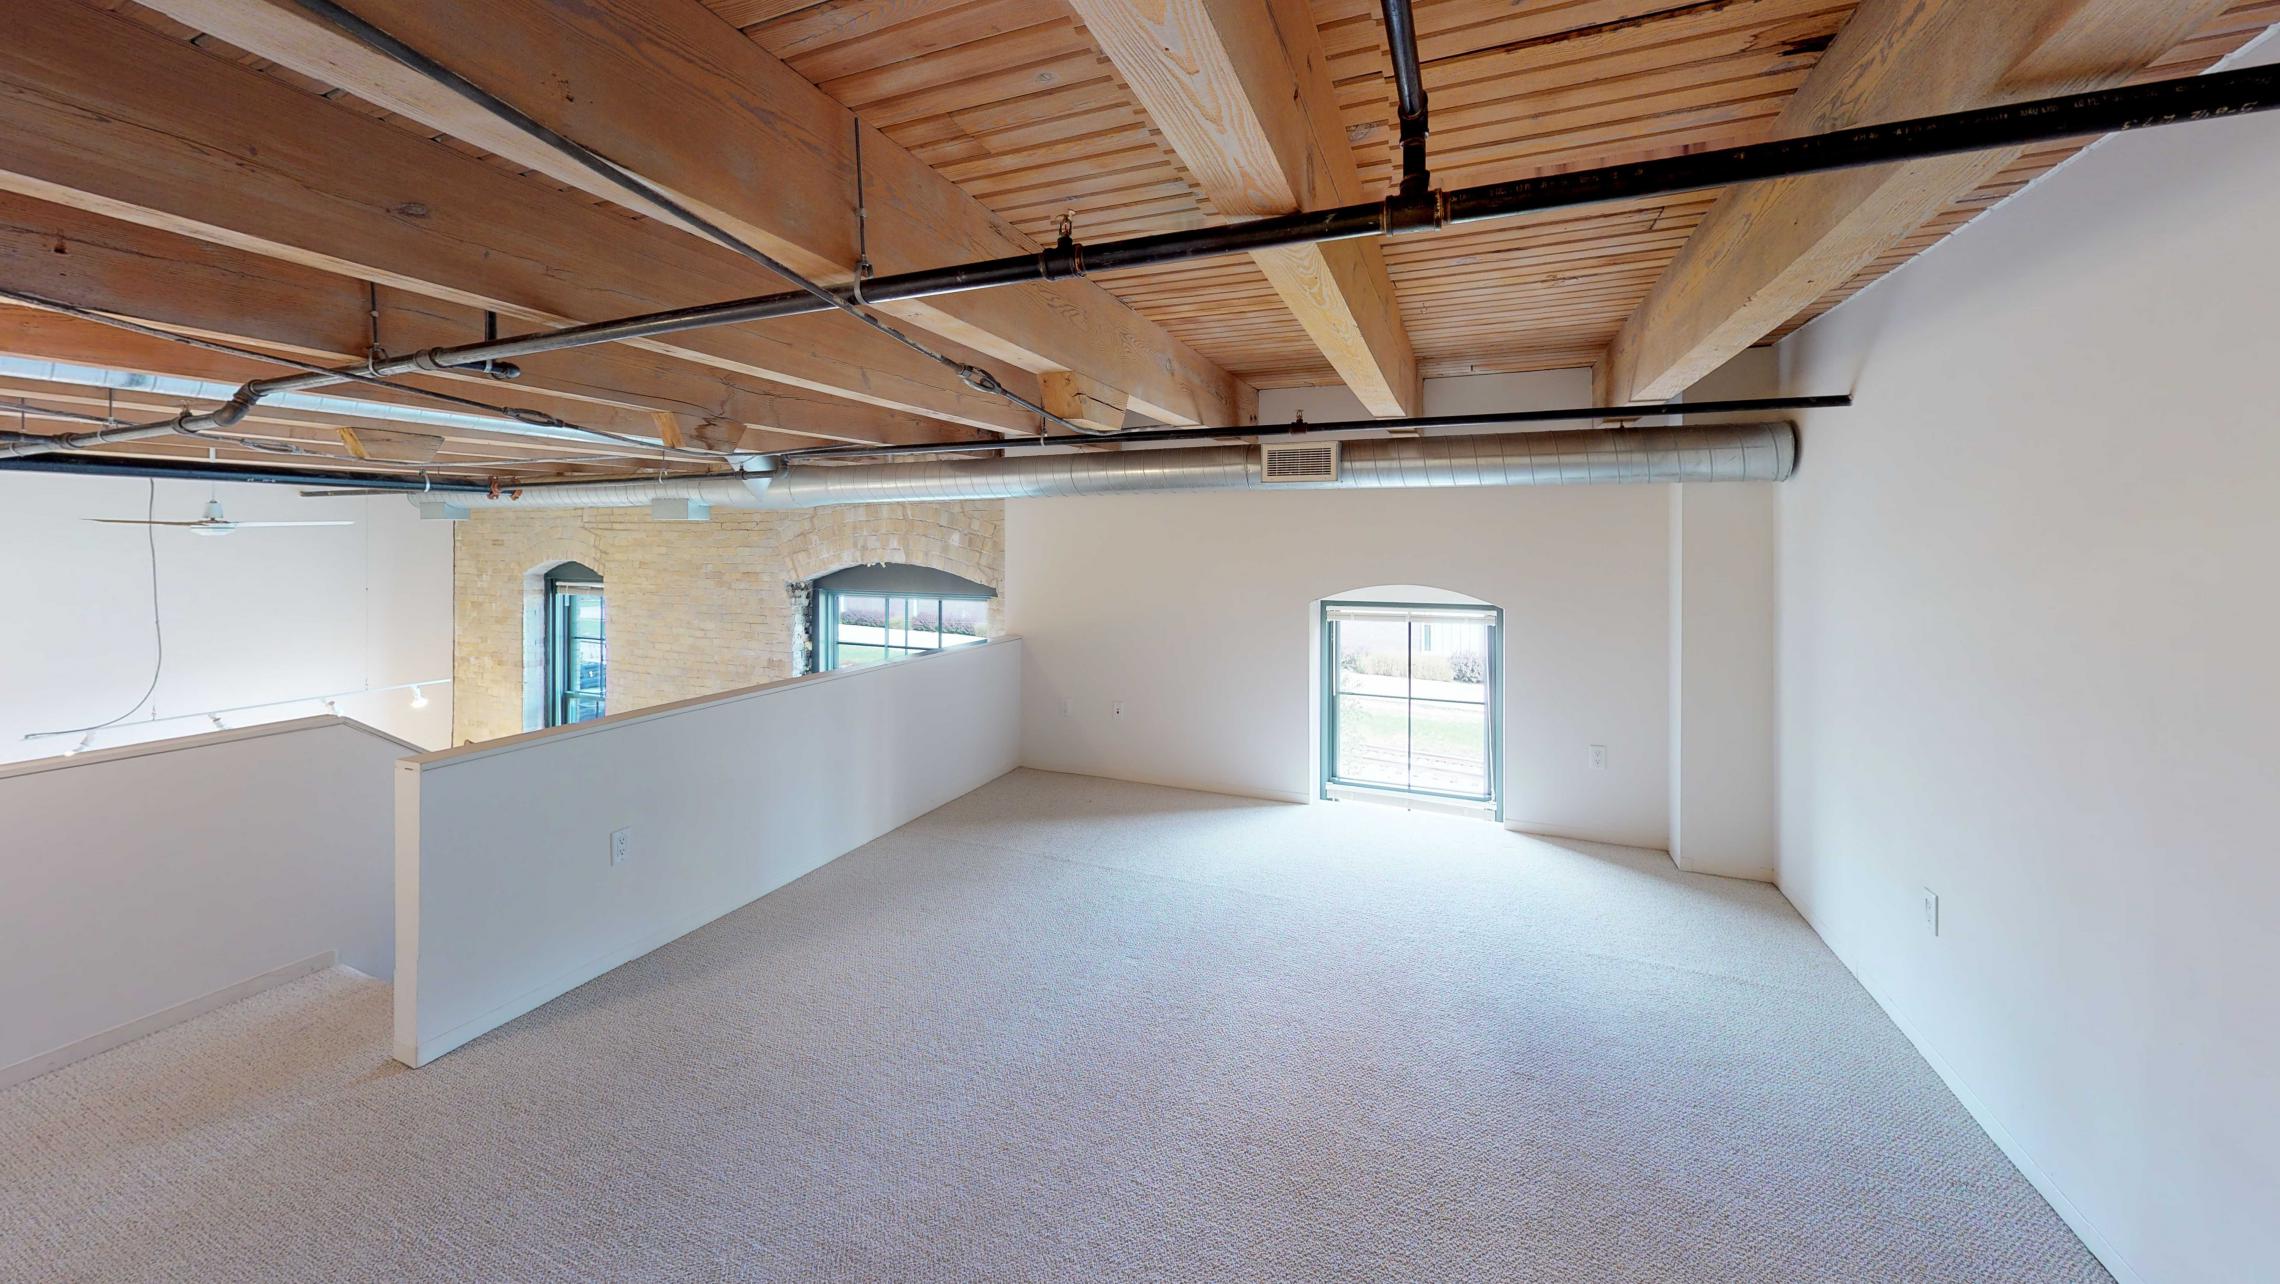 Tobacco-Lofts-E203-Historic-Two-bedroom-lofted-design-exposed-brick-downtown